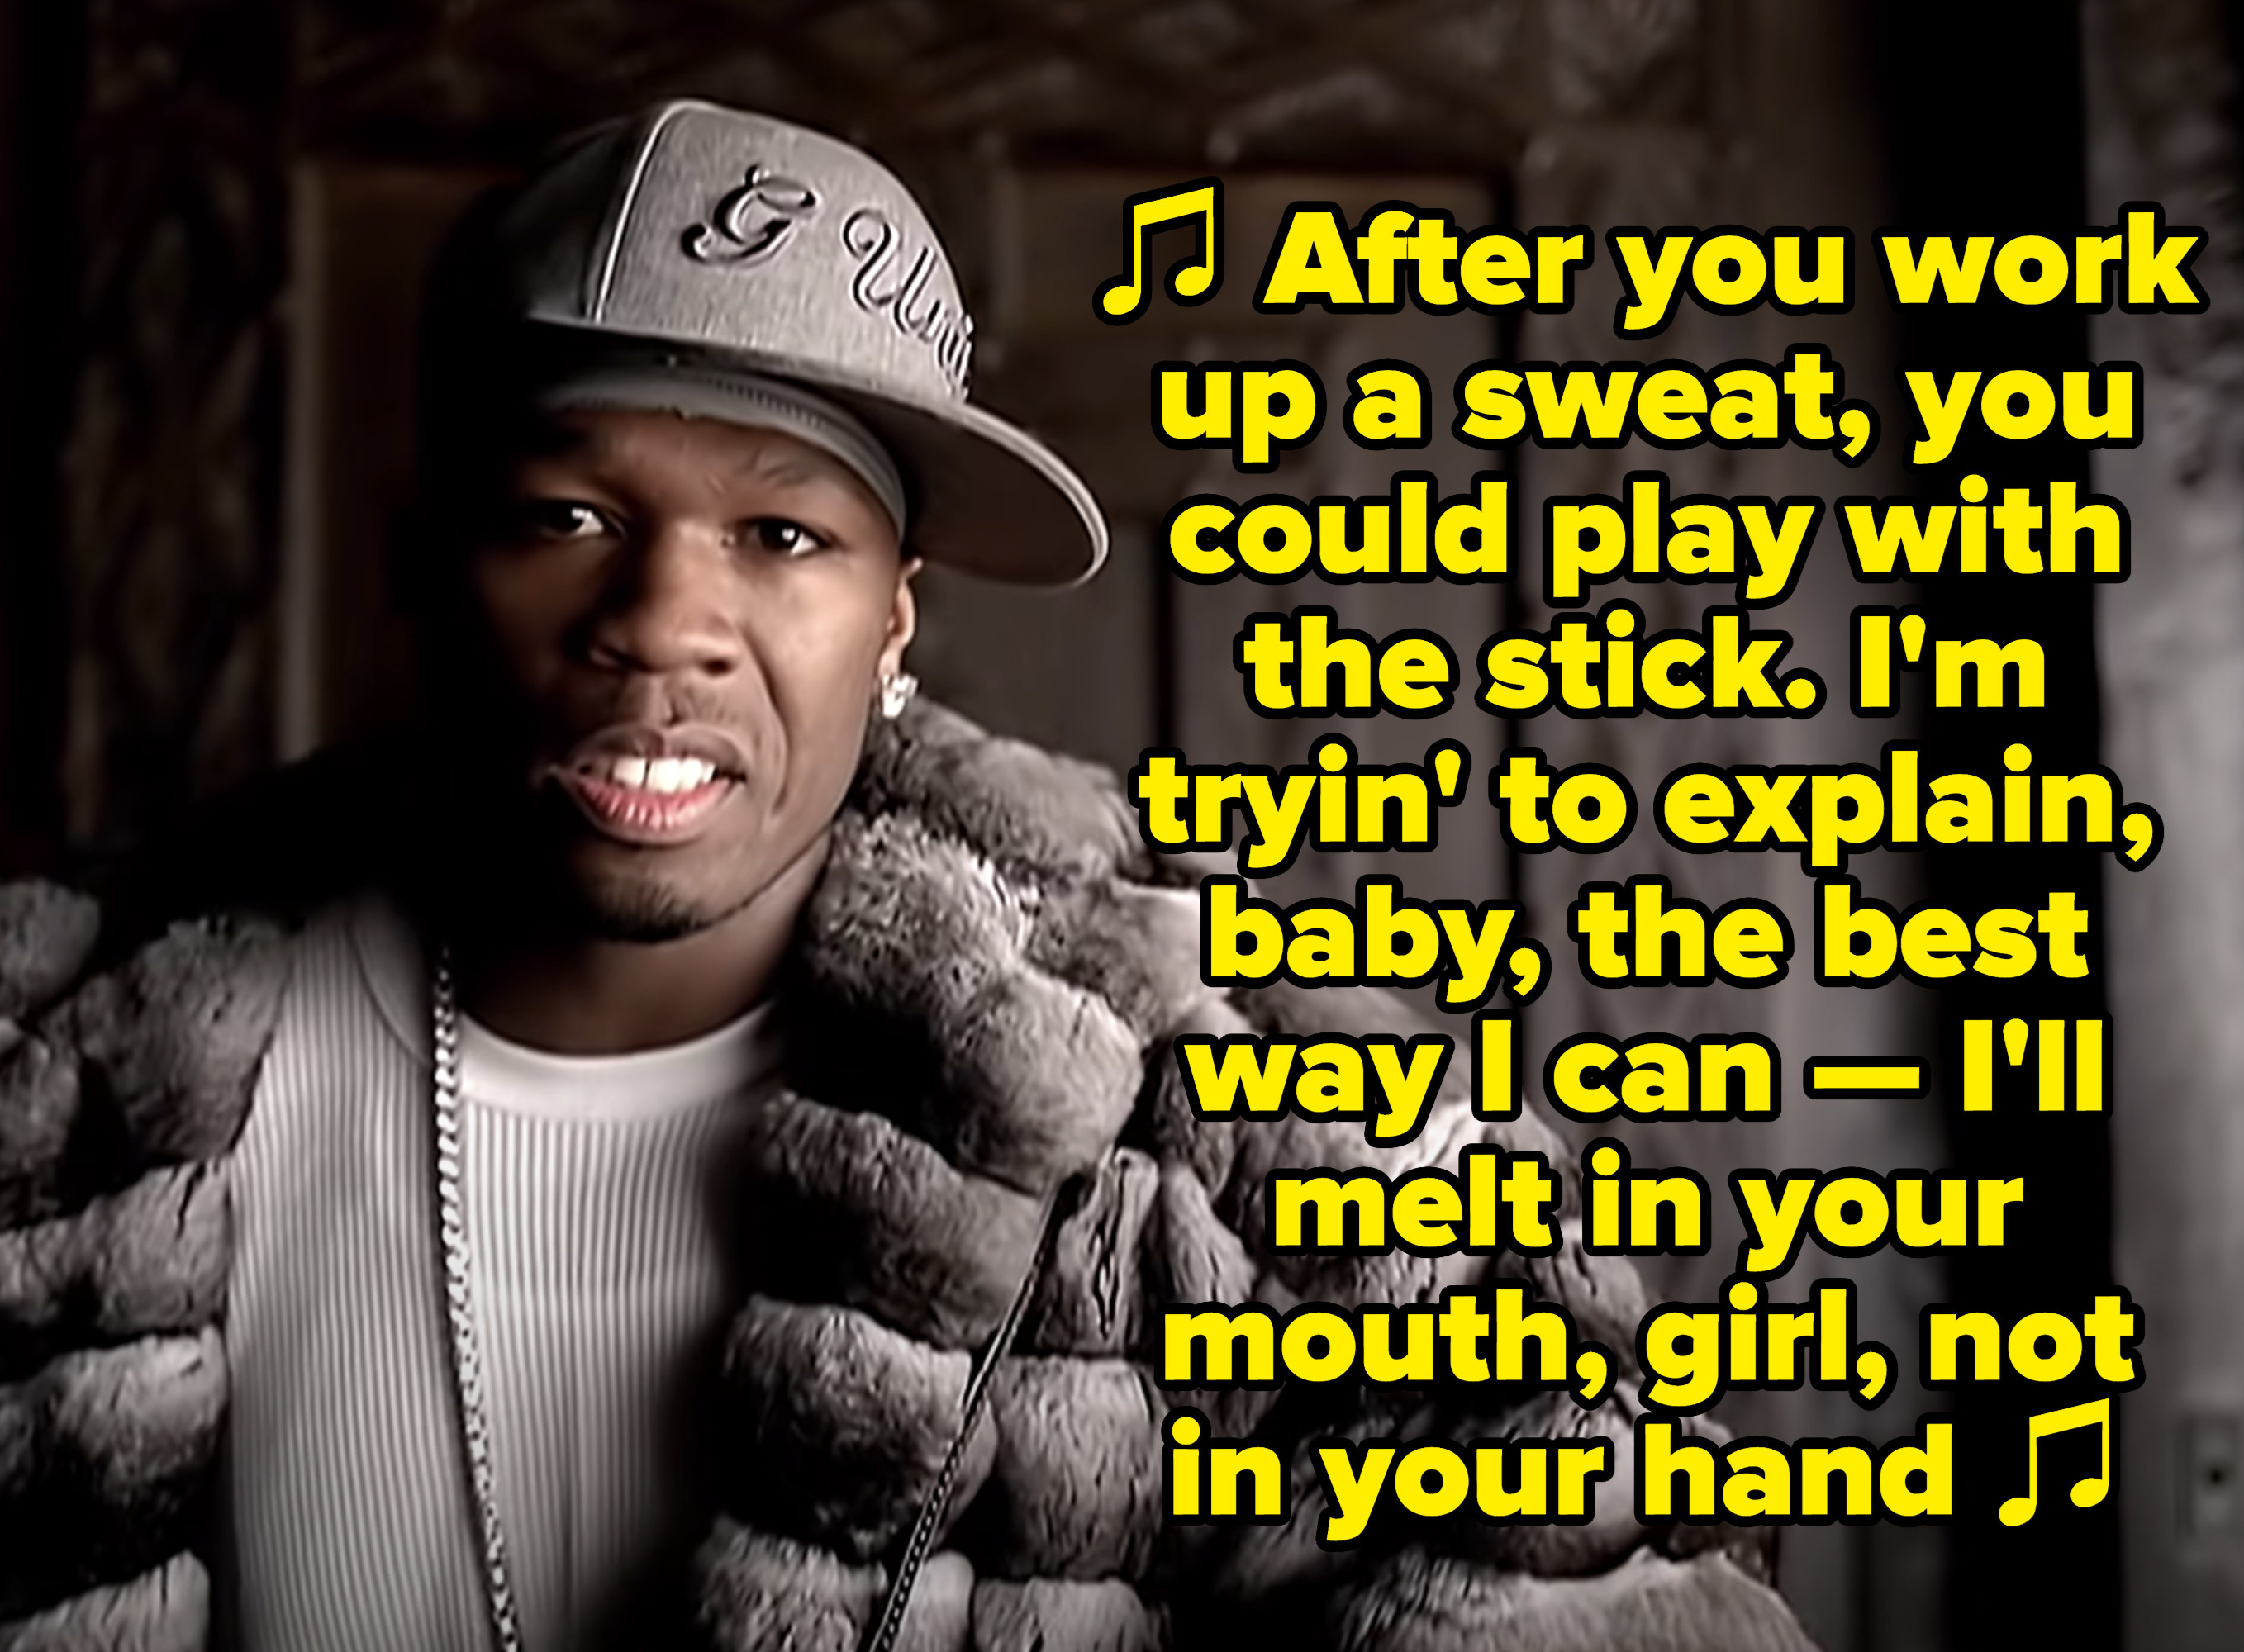 50 Cent rapping: &quot;After you work up a sweat, you could play with the stick. I&#x27;m tryin&#x27; to explain, baby, the best way I can — I&#x27;ll melt in your mouth, girl, not in your hand&quot;